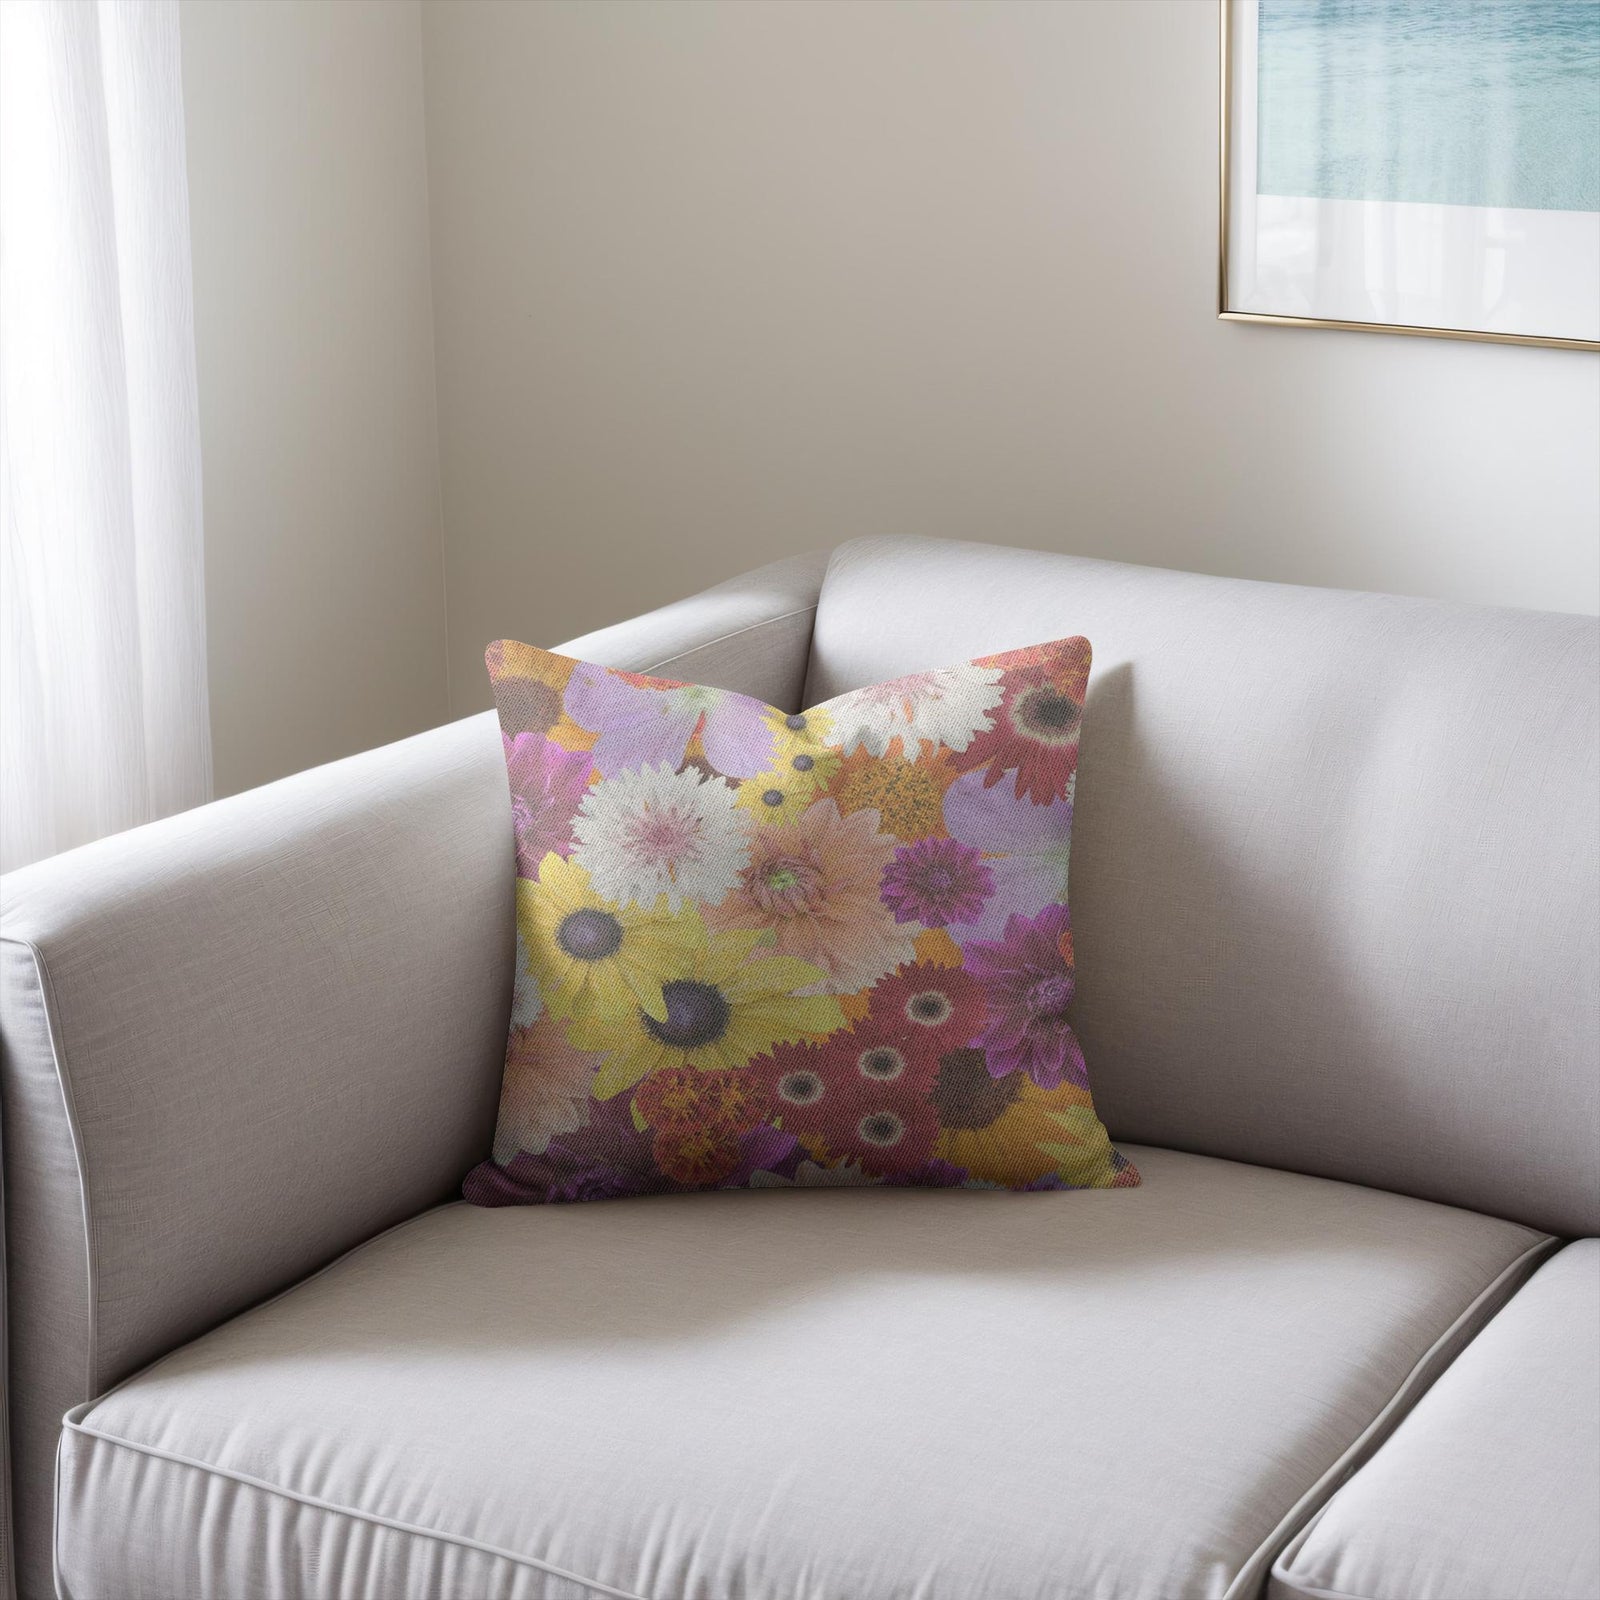 Woven pillows multiple sizes floral pattern